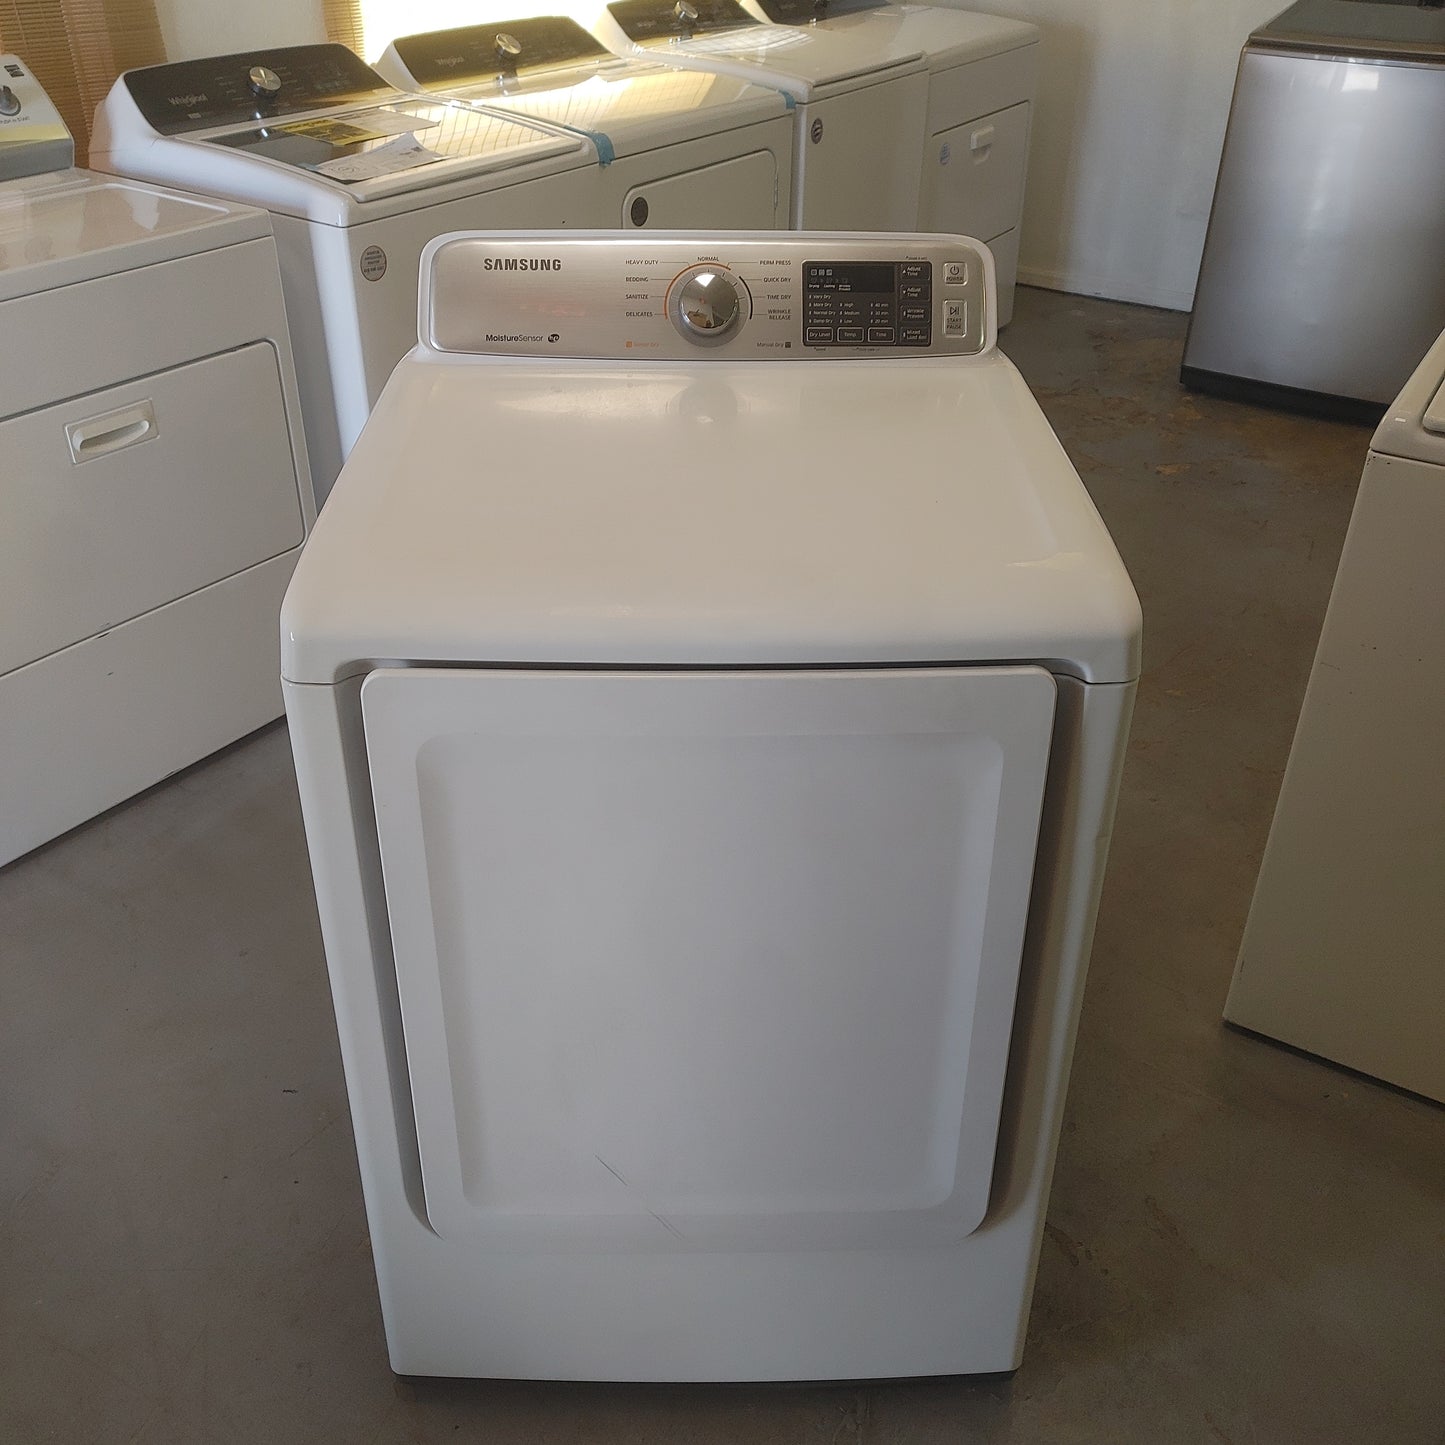 Used Samsung 7.4 cubic foot electric dryer